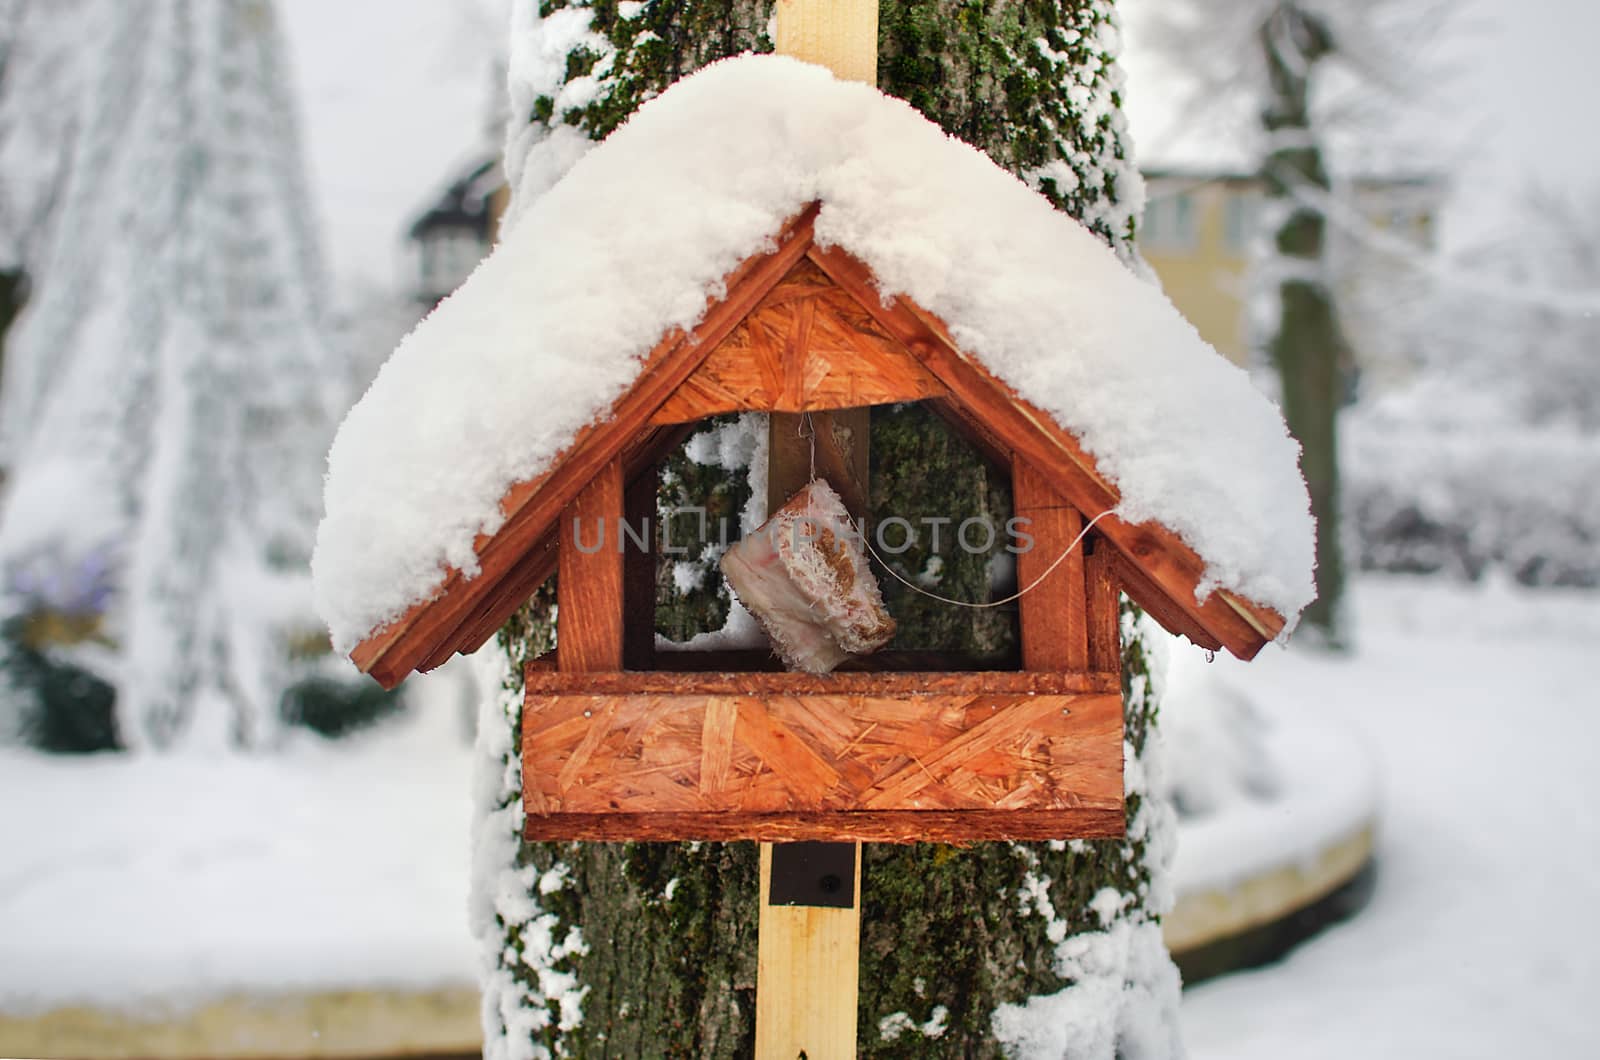 Wooden feeder roof is full of snow and some hanging slice of bacon is inside. Concept of winter bird care feeding in the city or village. Wildlife Day